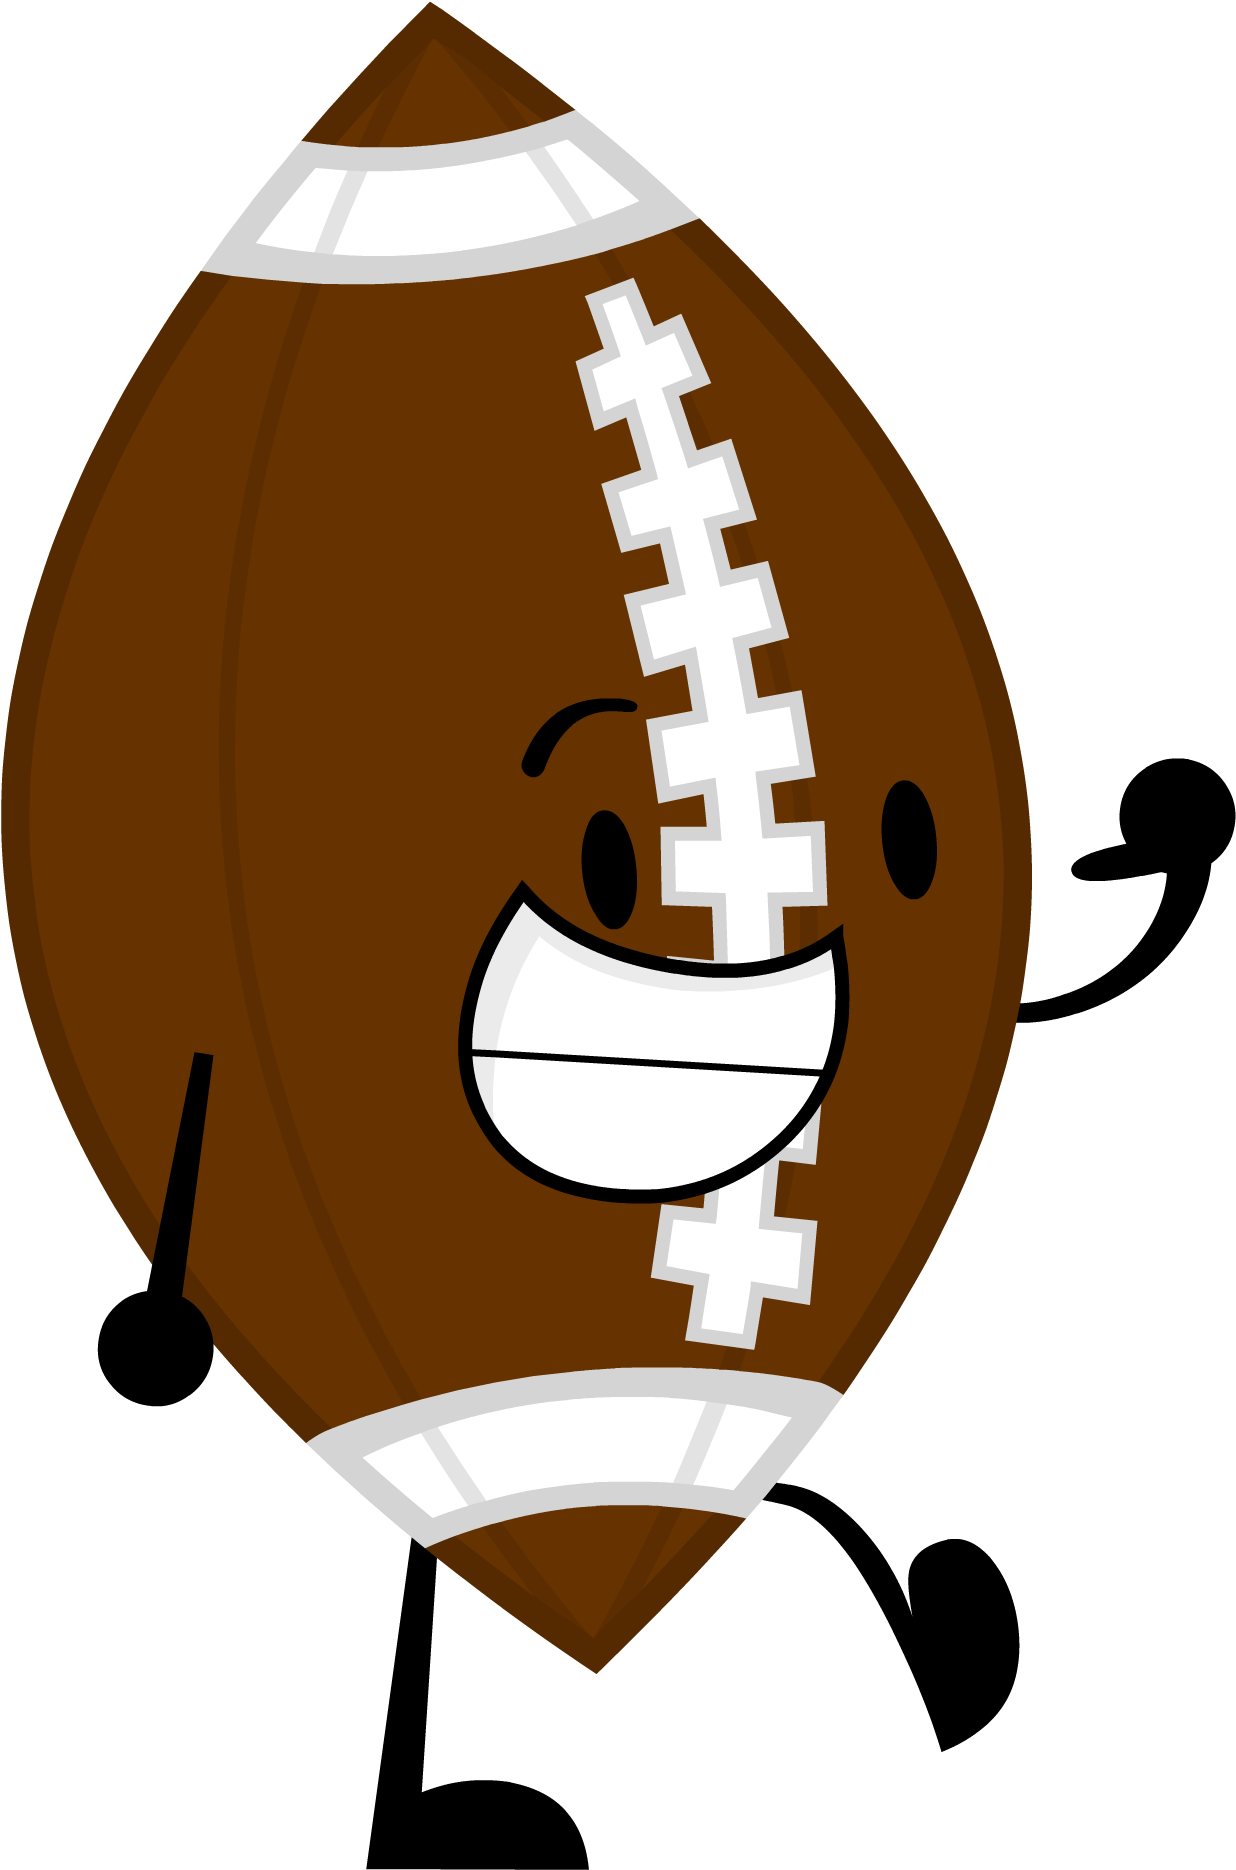 Bfdi Football, Find more high quality free transparent png clipart images o...